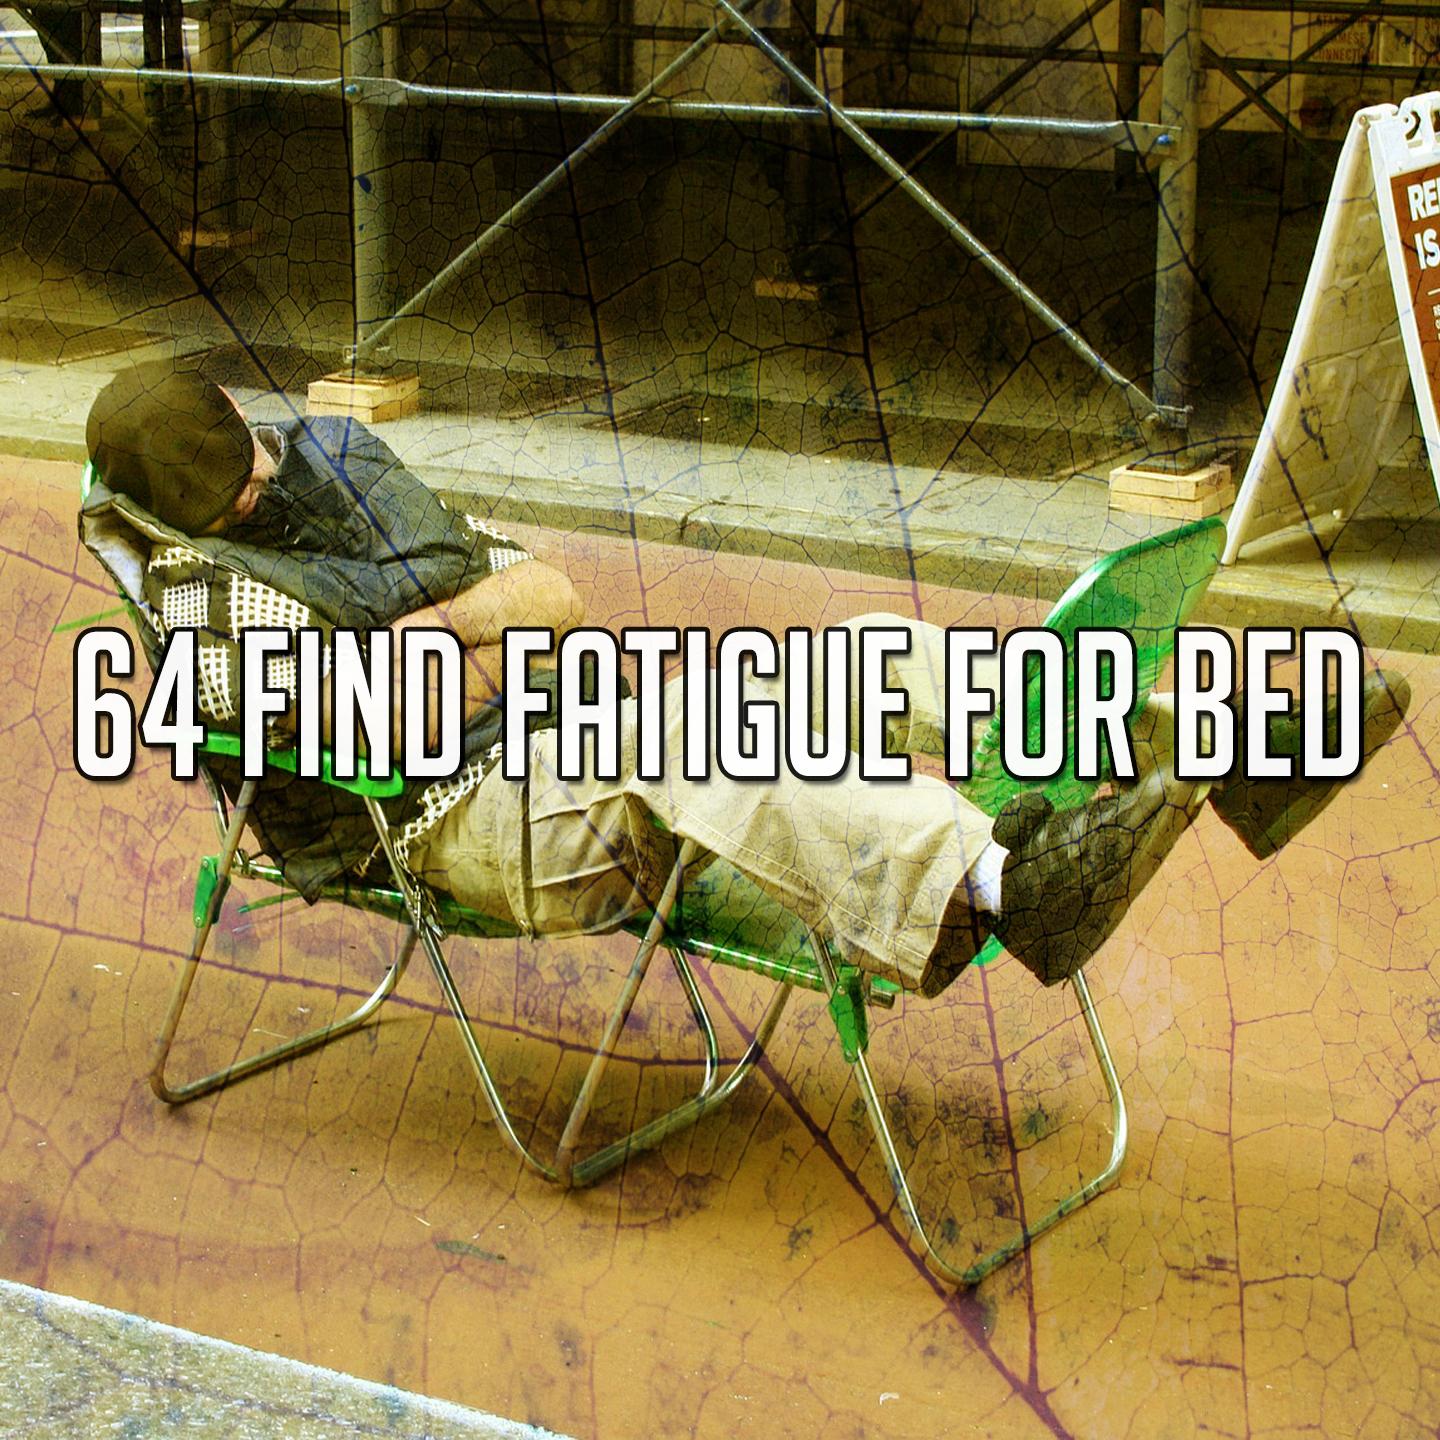 64 Find Fatigue for Bed